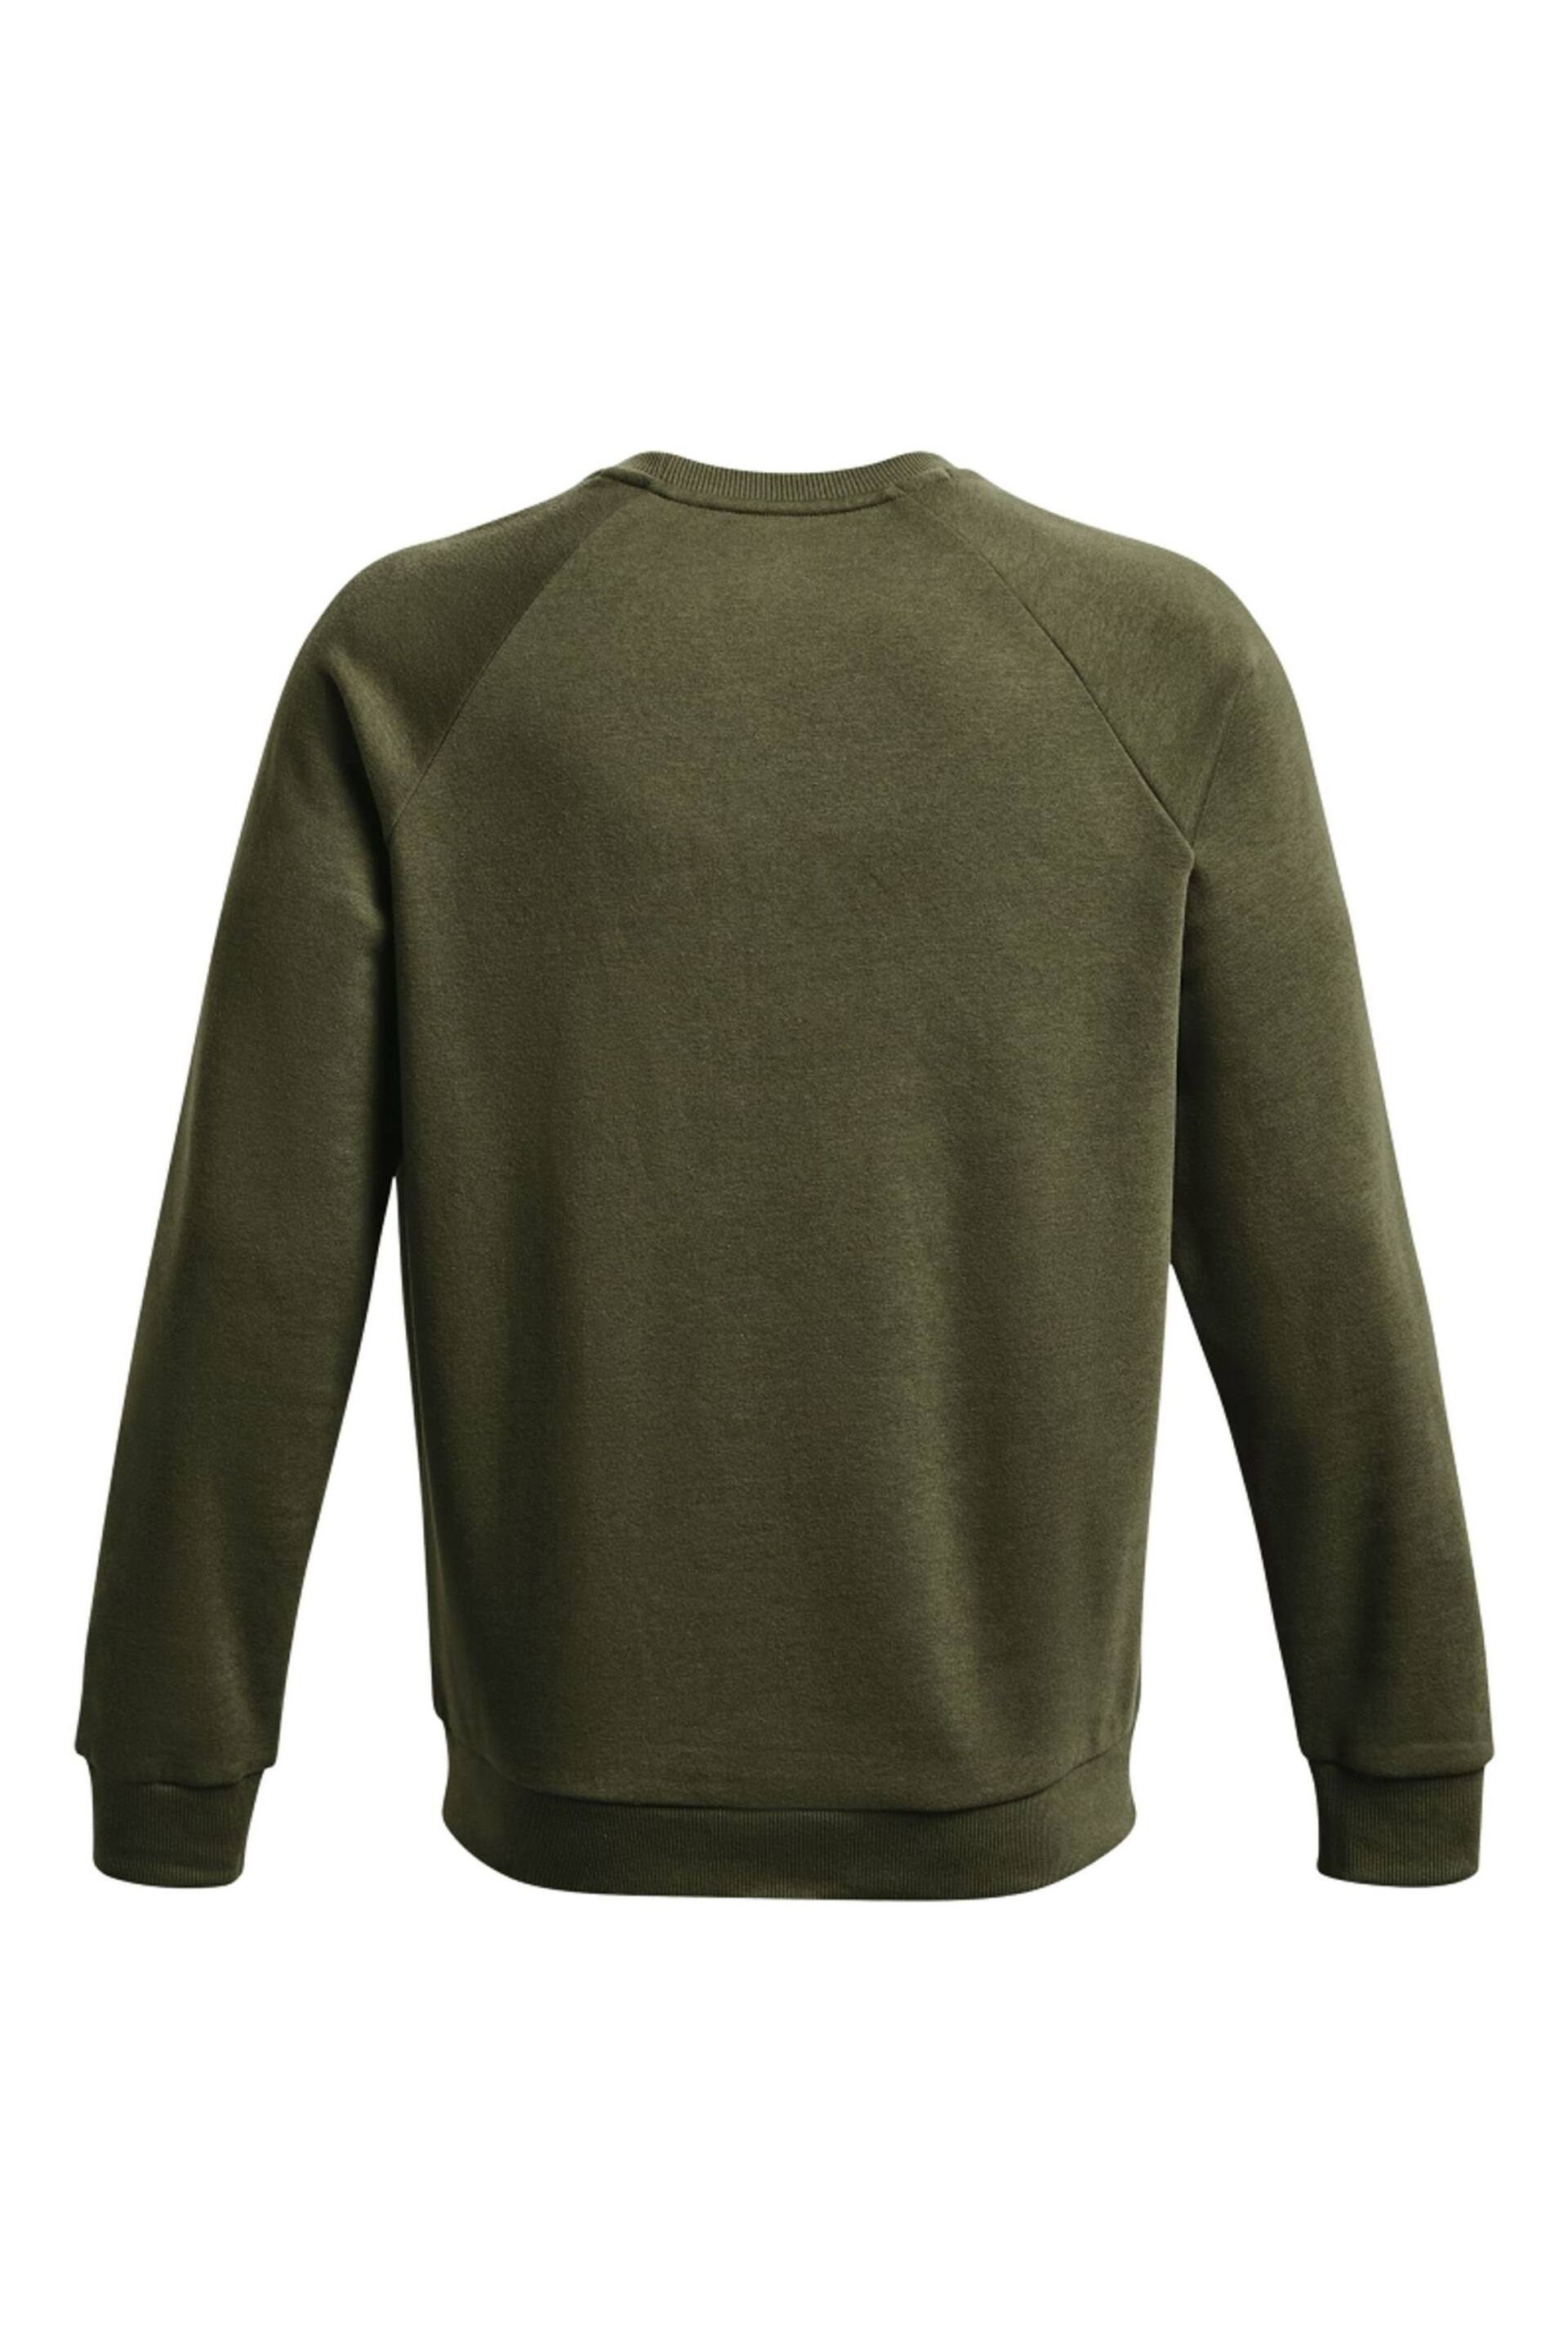 Under Armour Green Rival Sweatshirt - Image 6 of 6